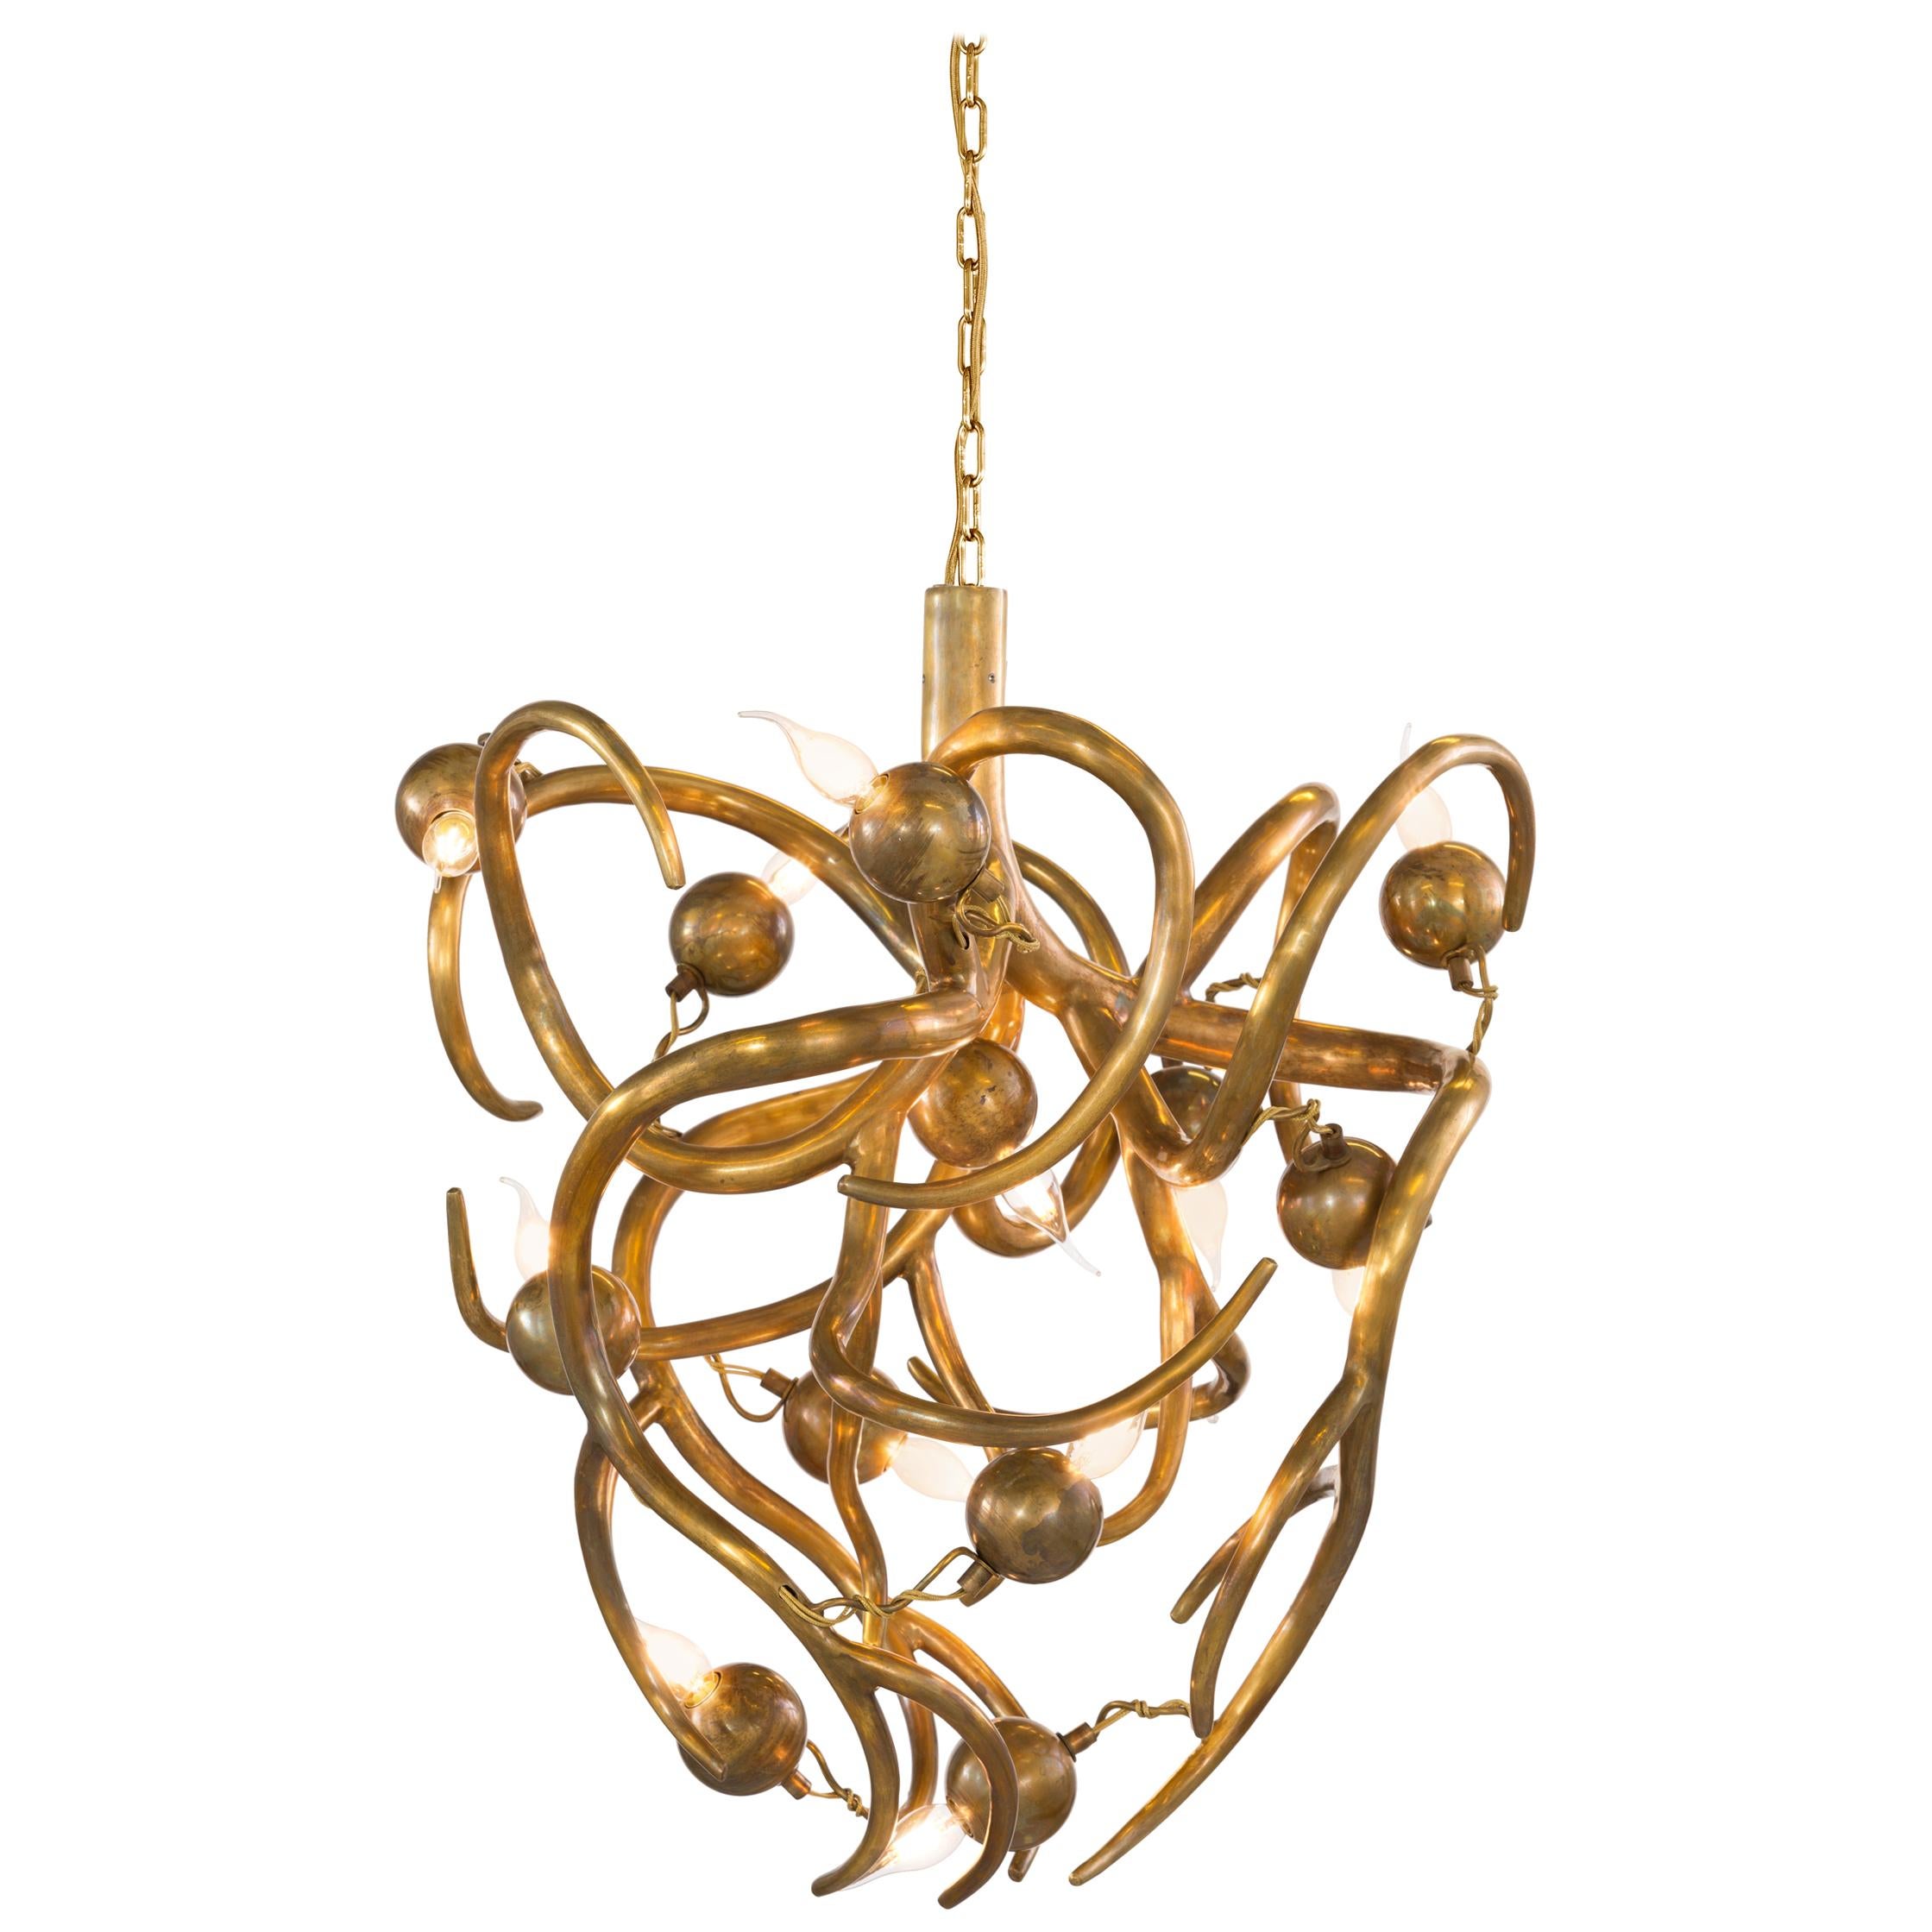 Modern Chandelier in a Brass Brunished Finish, Eve Collection, by Brand Van For Sale